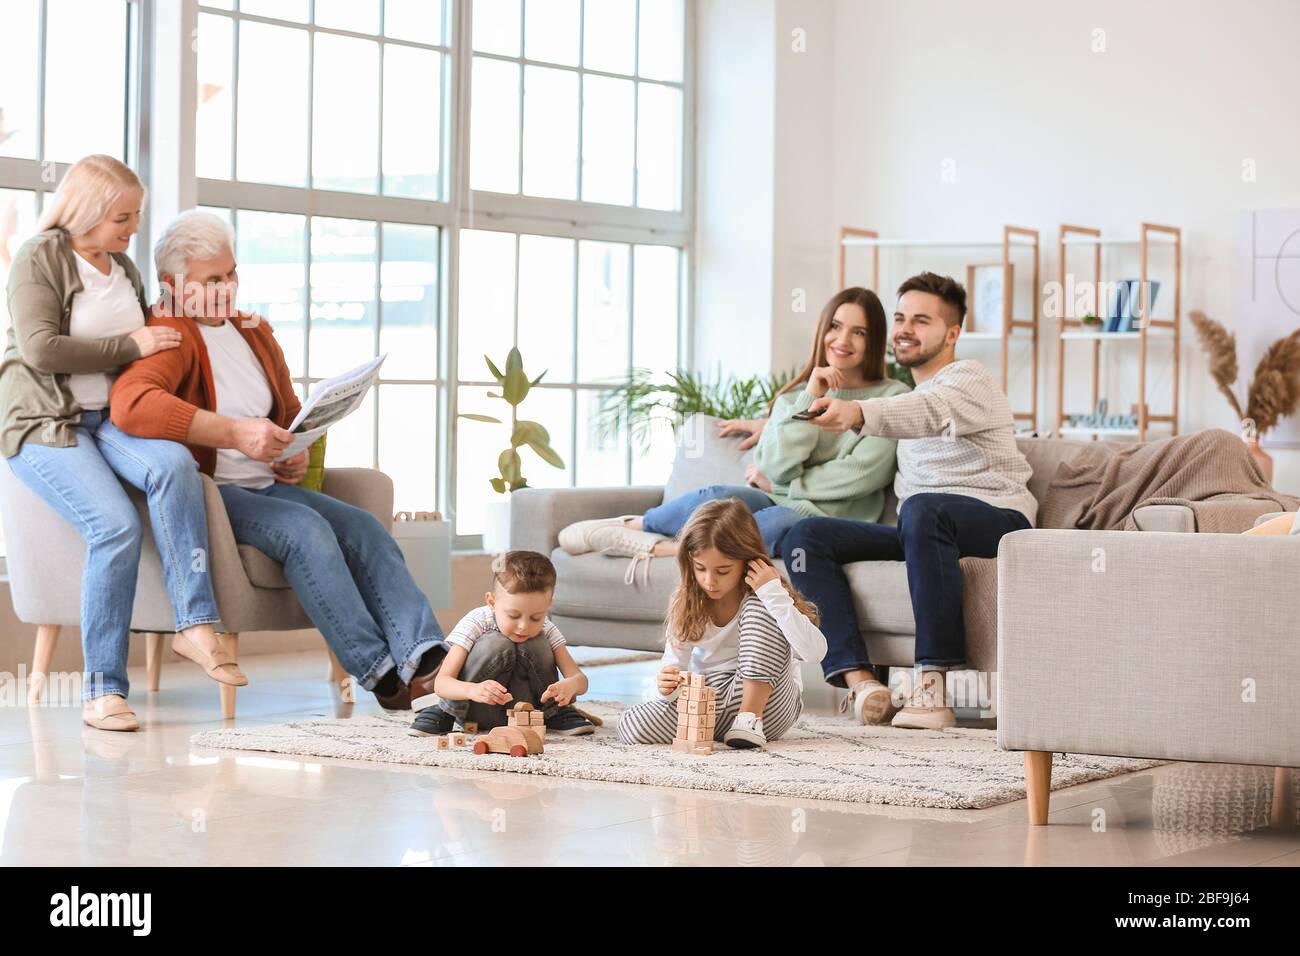 Big family spending time together at home Stock Photo